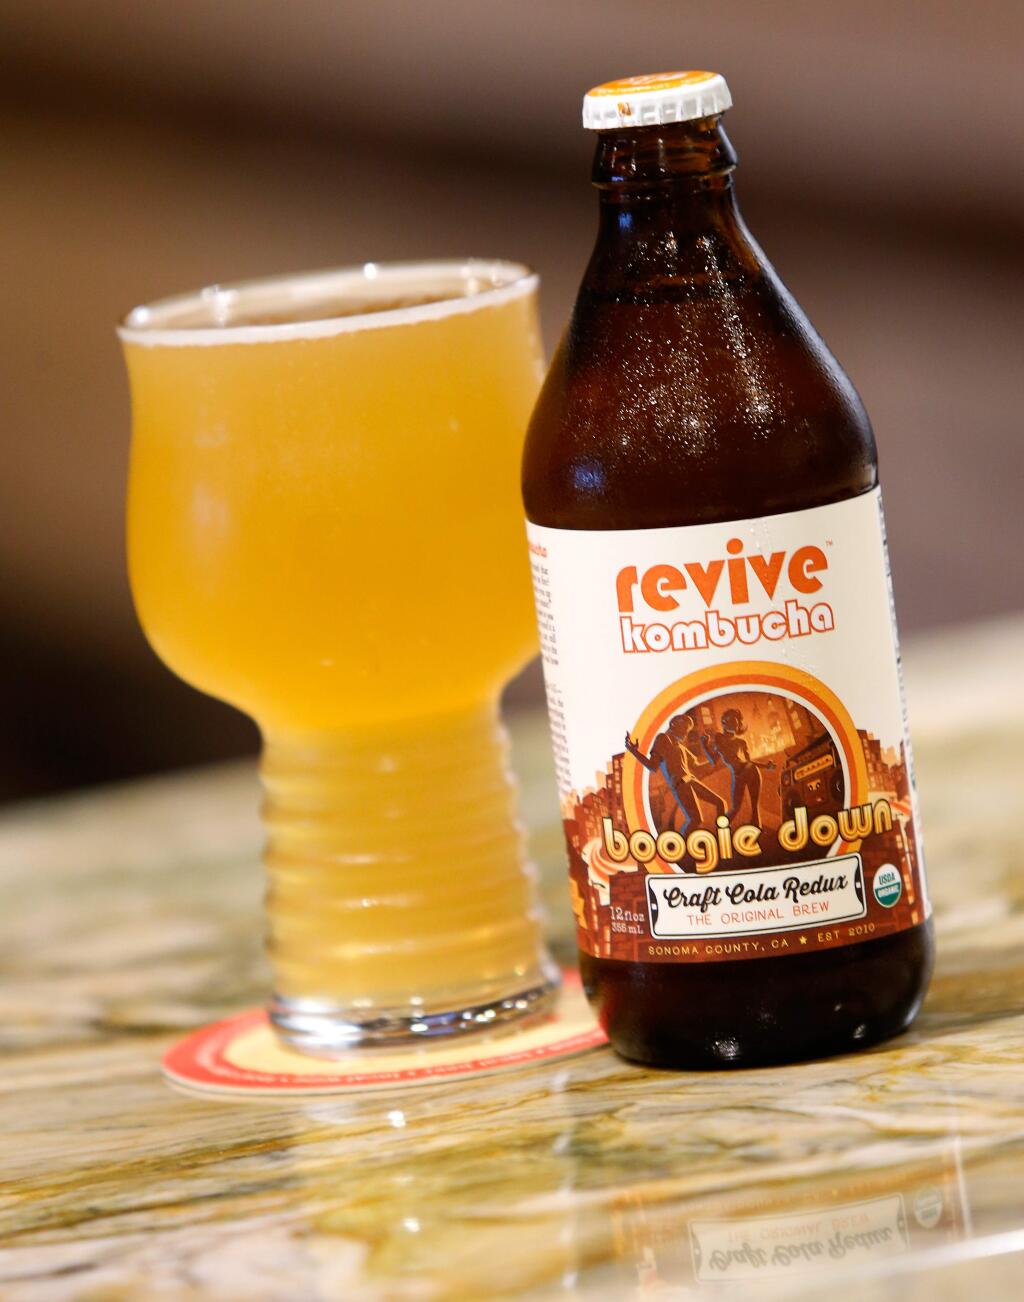 Revive Kombucha Boogie Down is available on tap or bottled at the Oliver's Market Tavern in Windsor, California on Thursday, August 24, 2017. (Alvin Jornada / The Press Democrat)